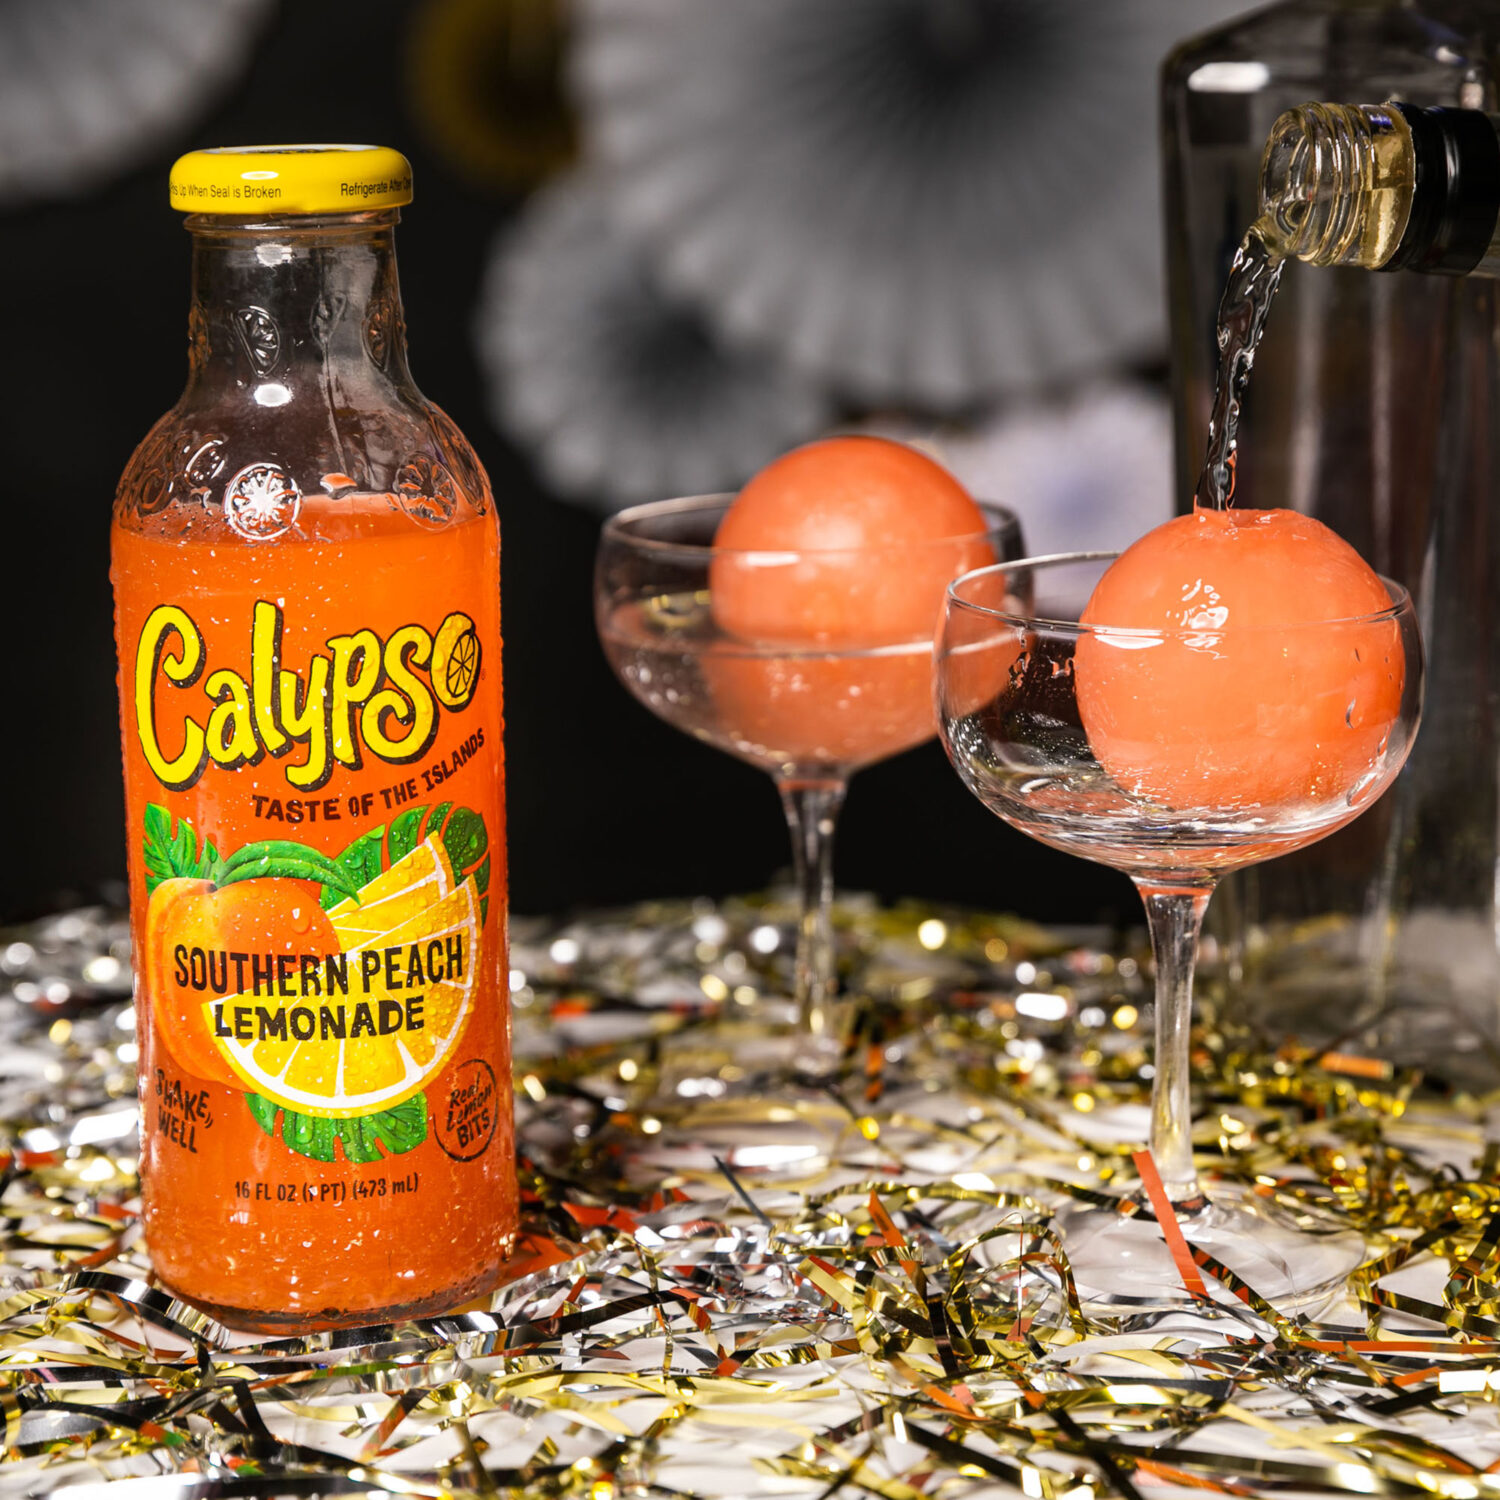 A bottle of Calypso Southern Peach Lemonade on a table next to confetti.